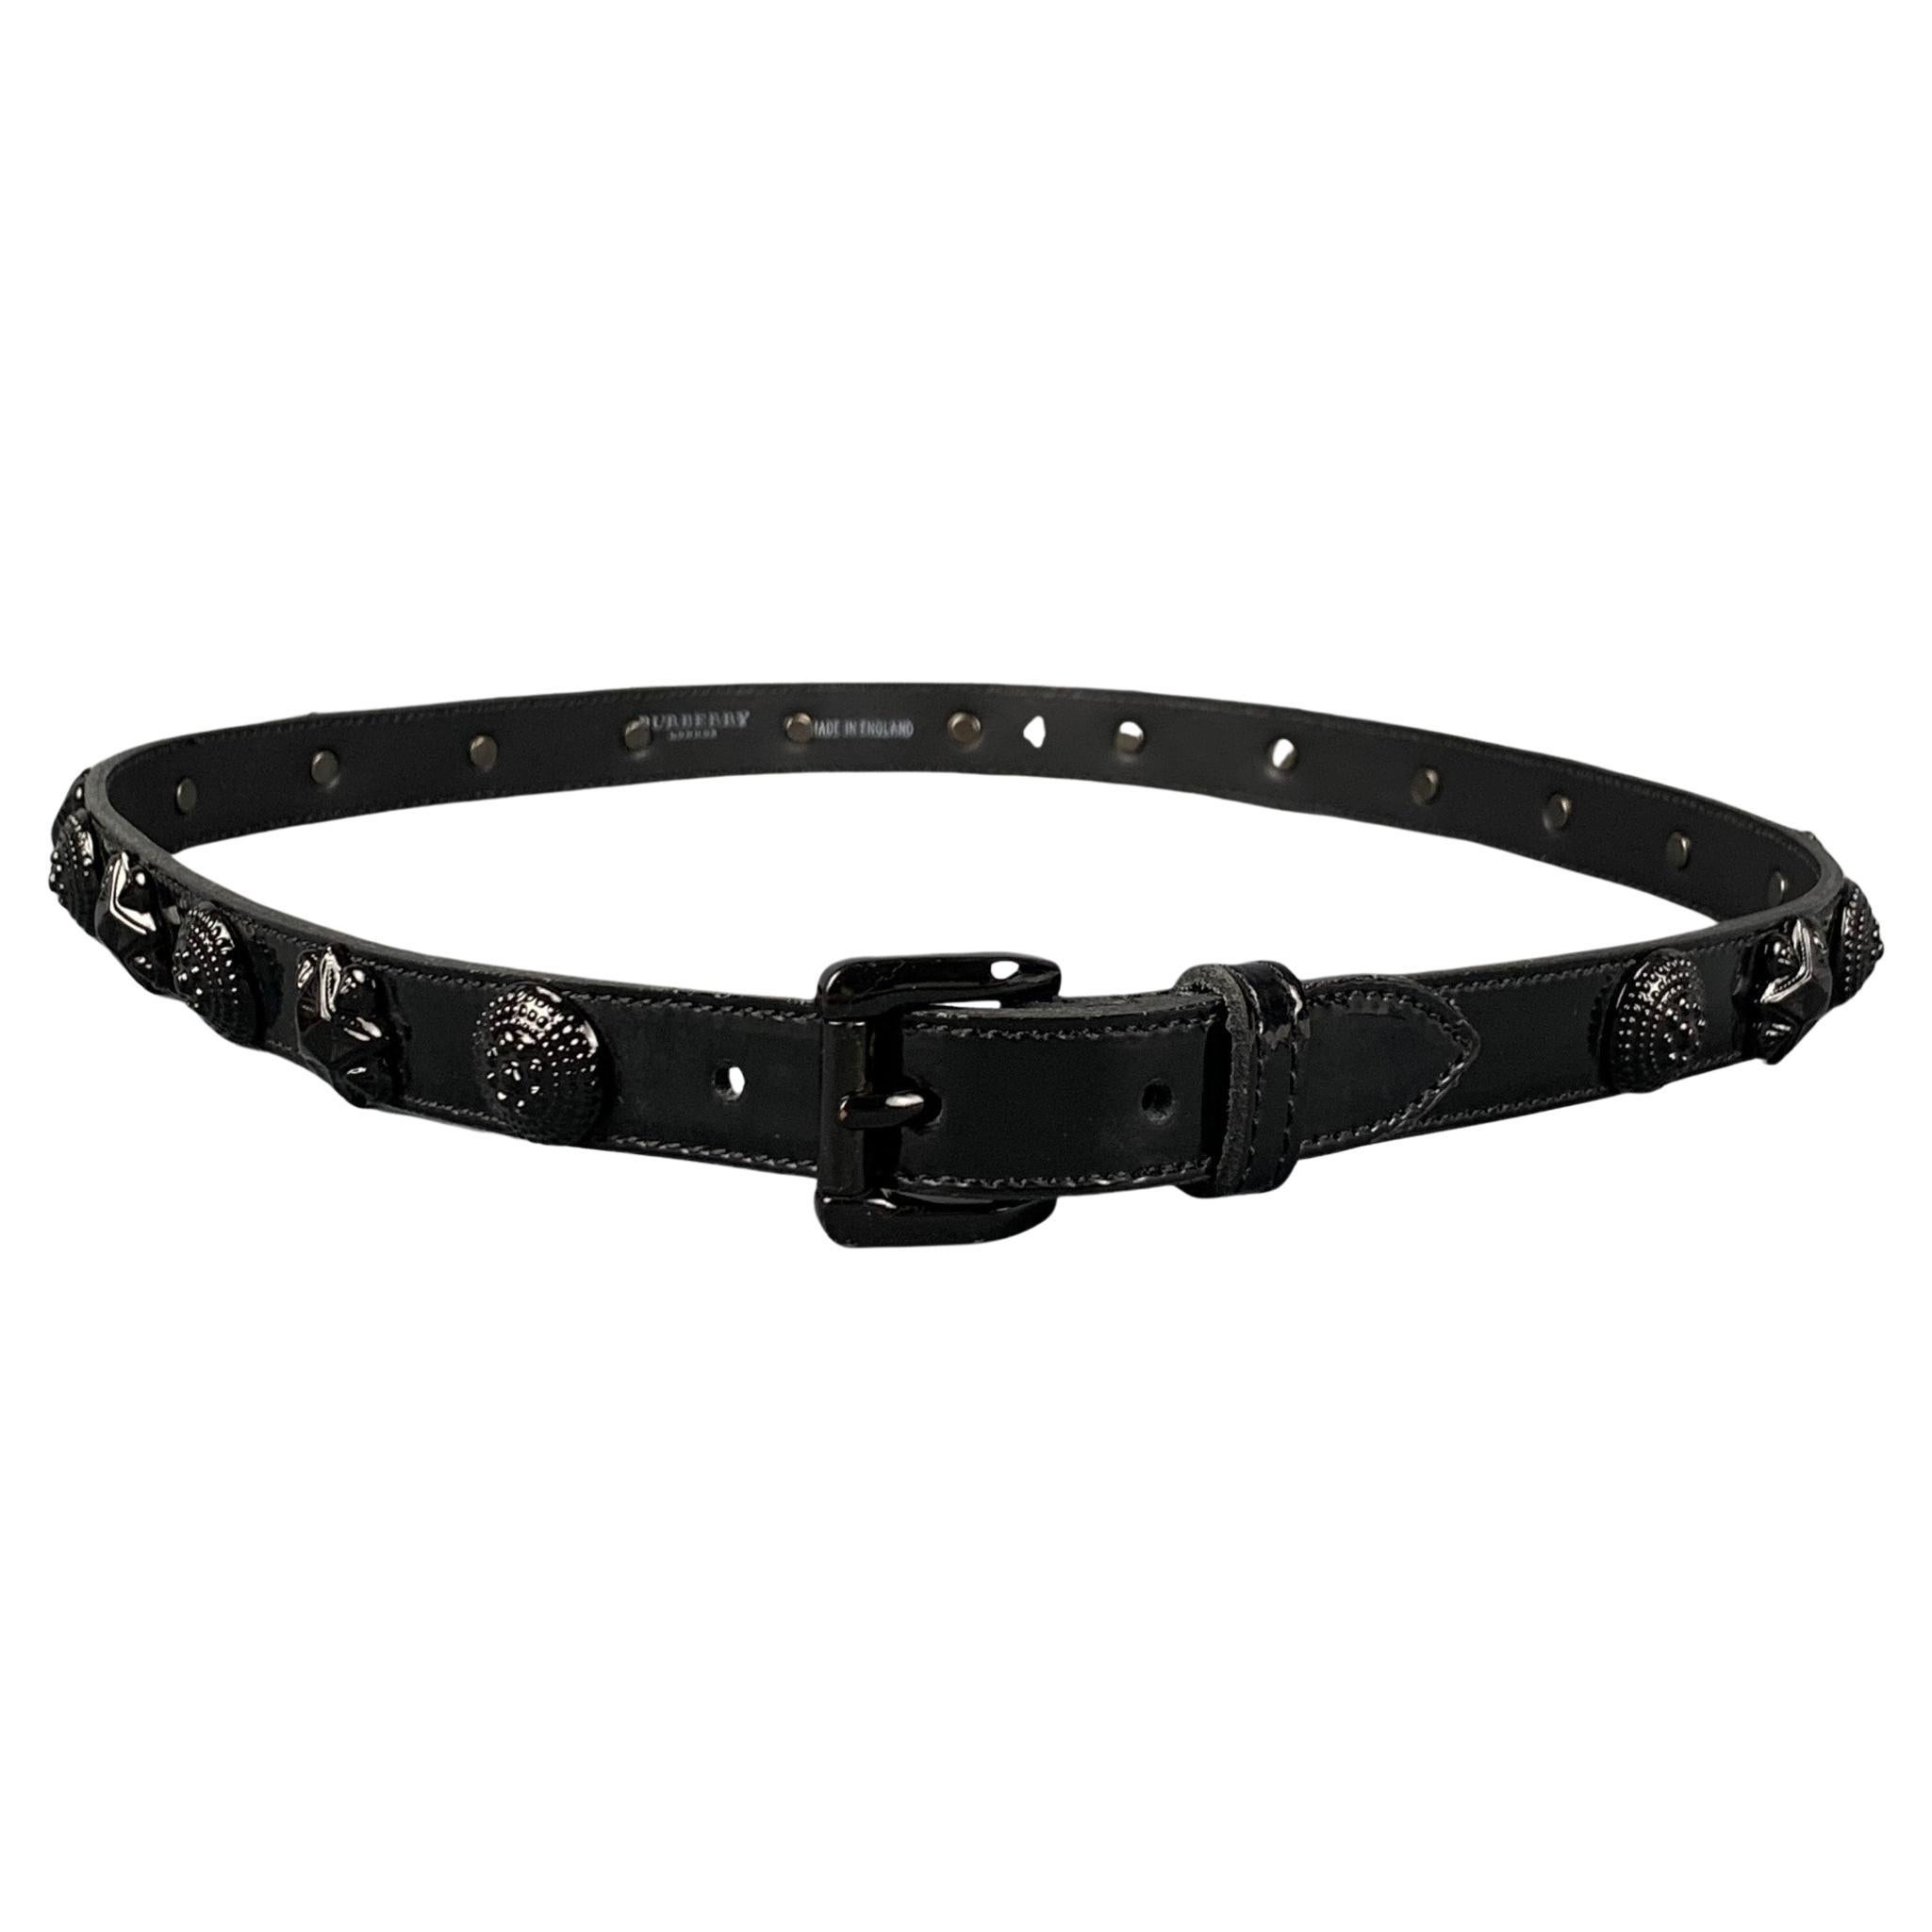 BURBERRY PRORSUM SS 08 Warrior Collection Size 4 Black Embellished Leather Belt